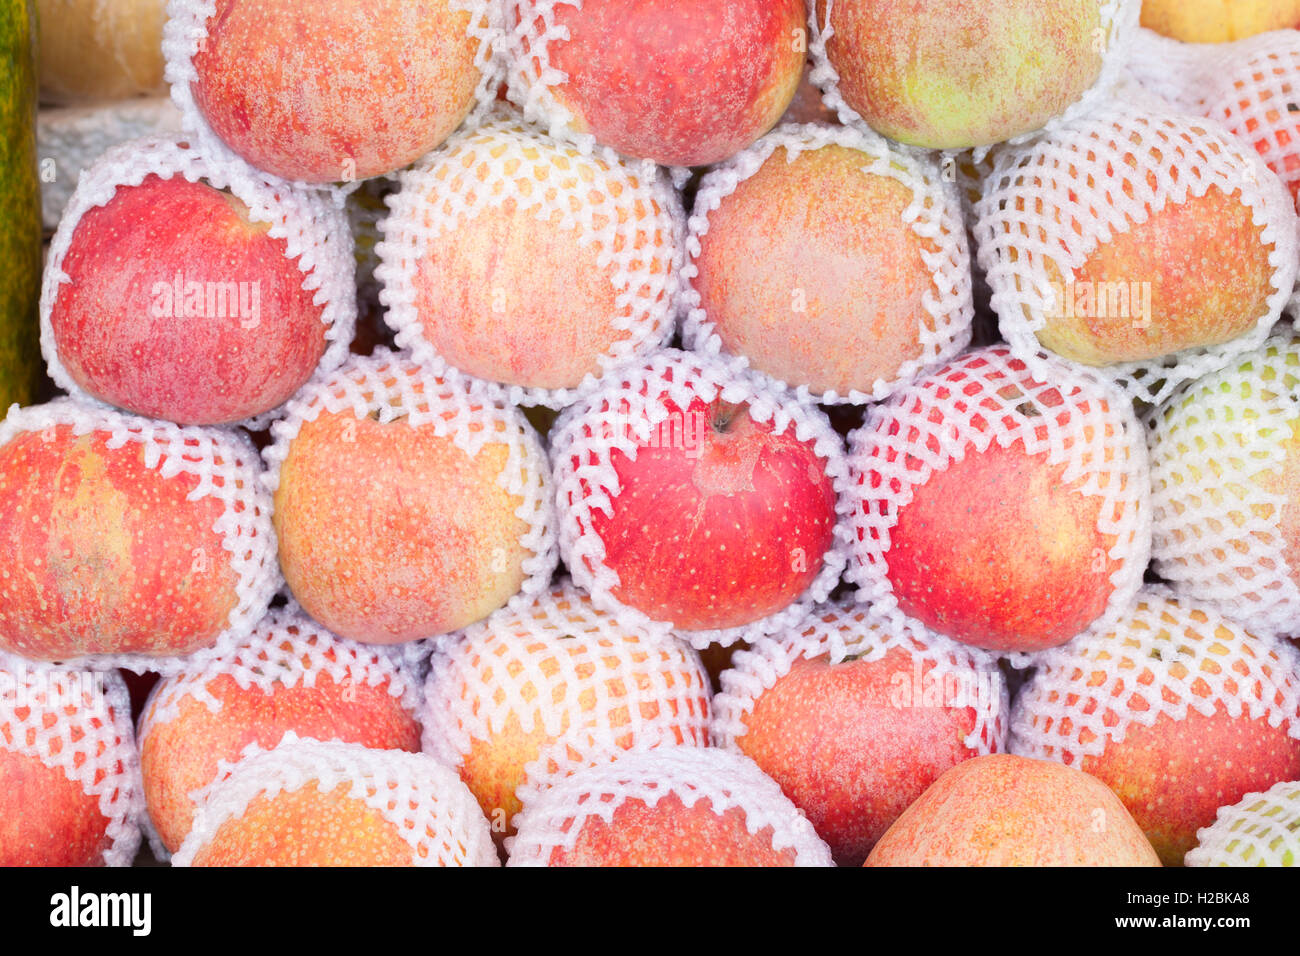 Fresh red apples, braeburn or malus domestica, on display at a market in Nepal Stock Photo